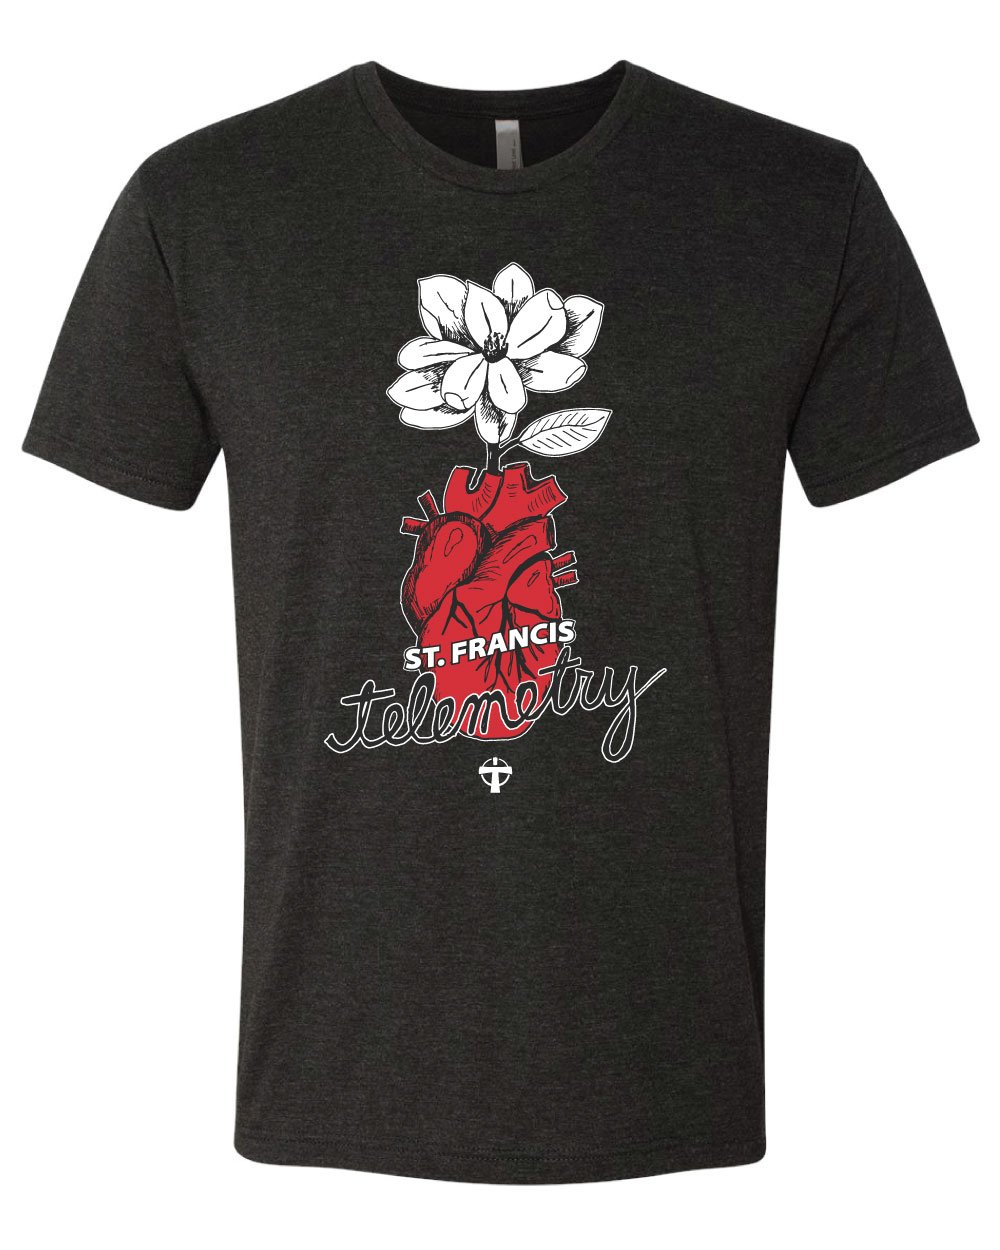 Image of St Francis Telemetry T Shirt Pre Order